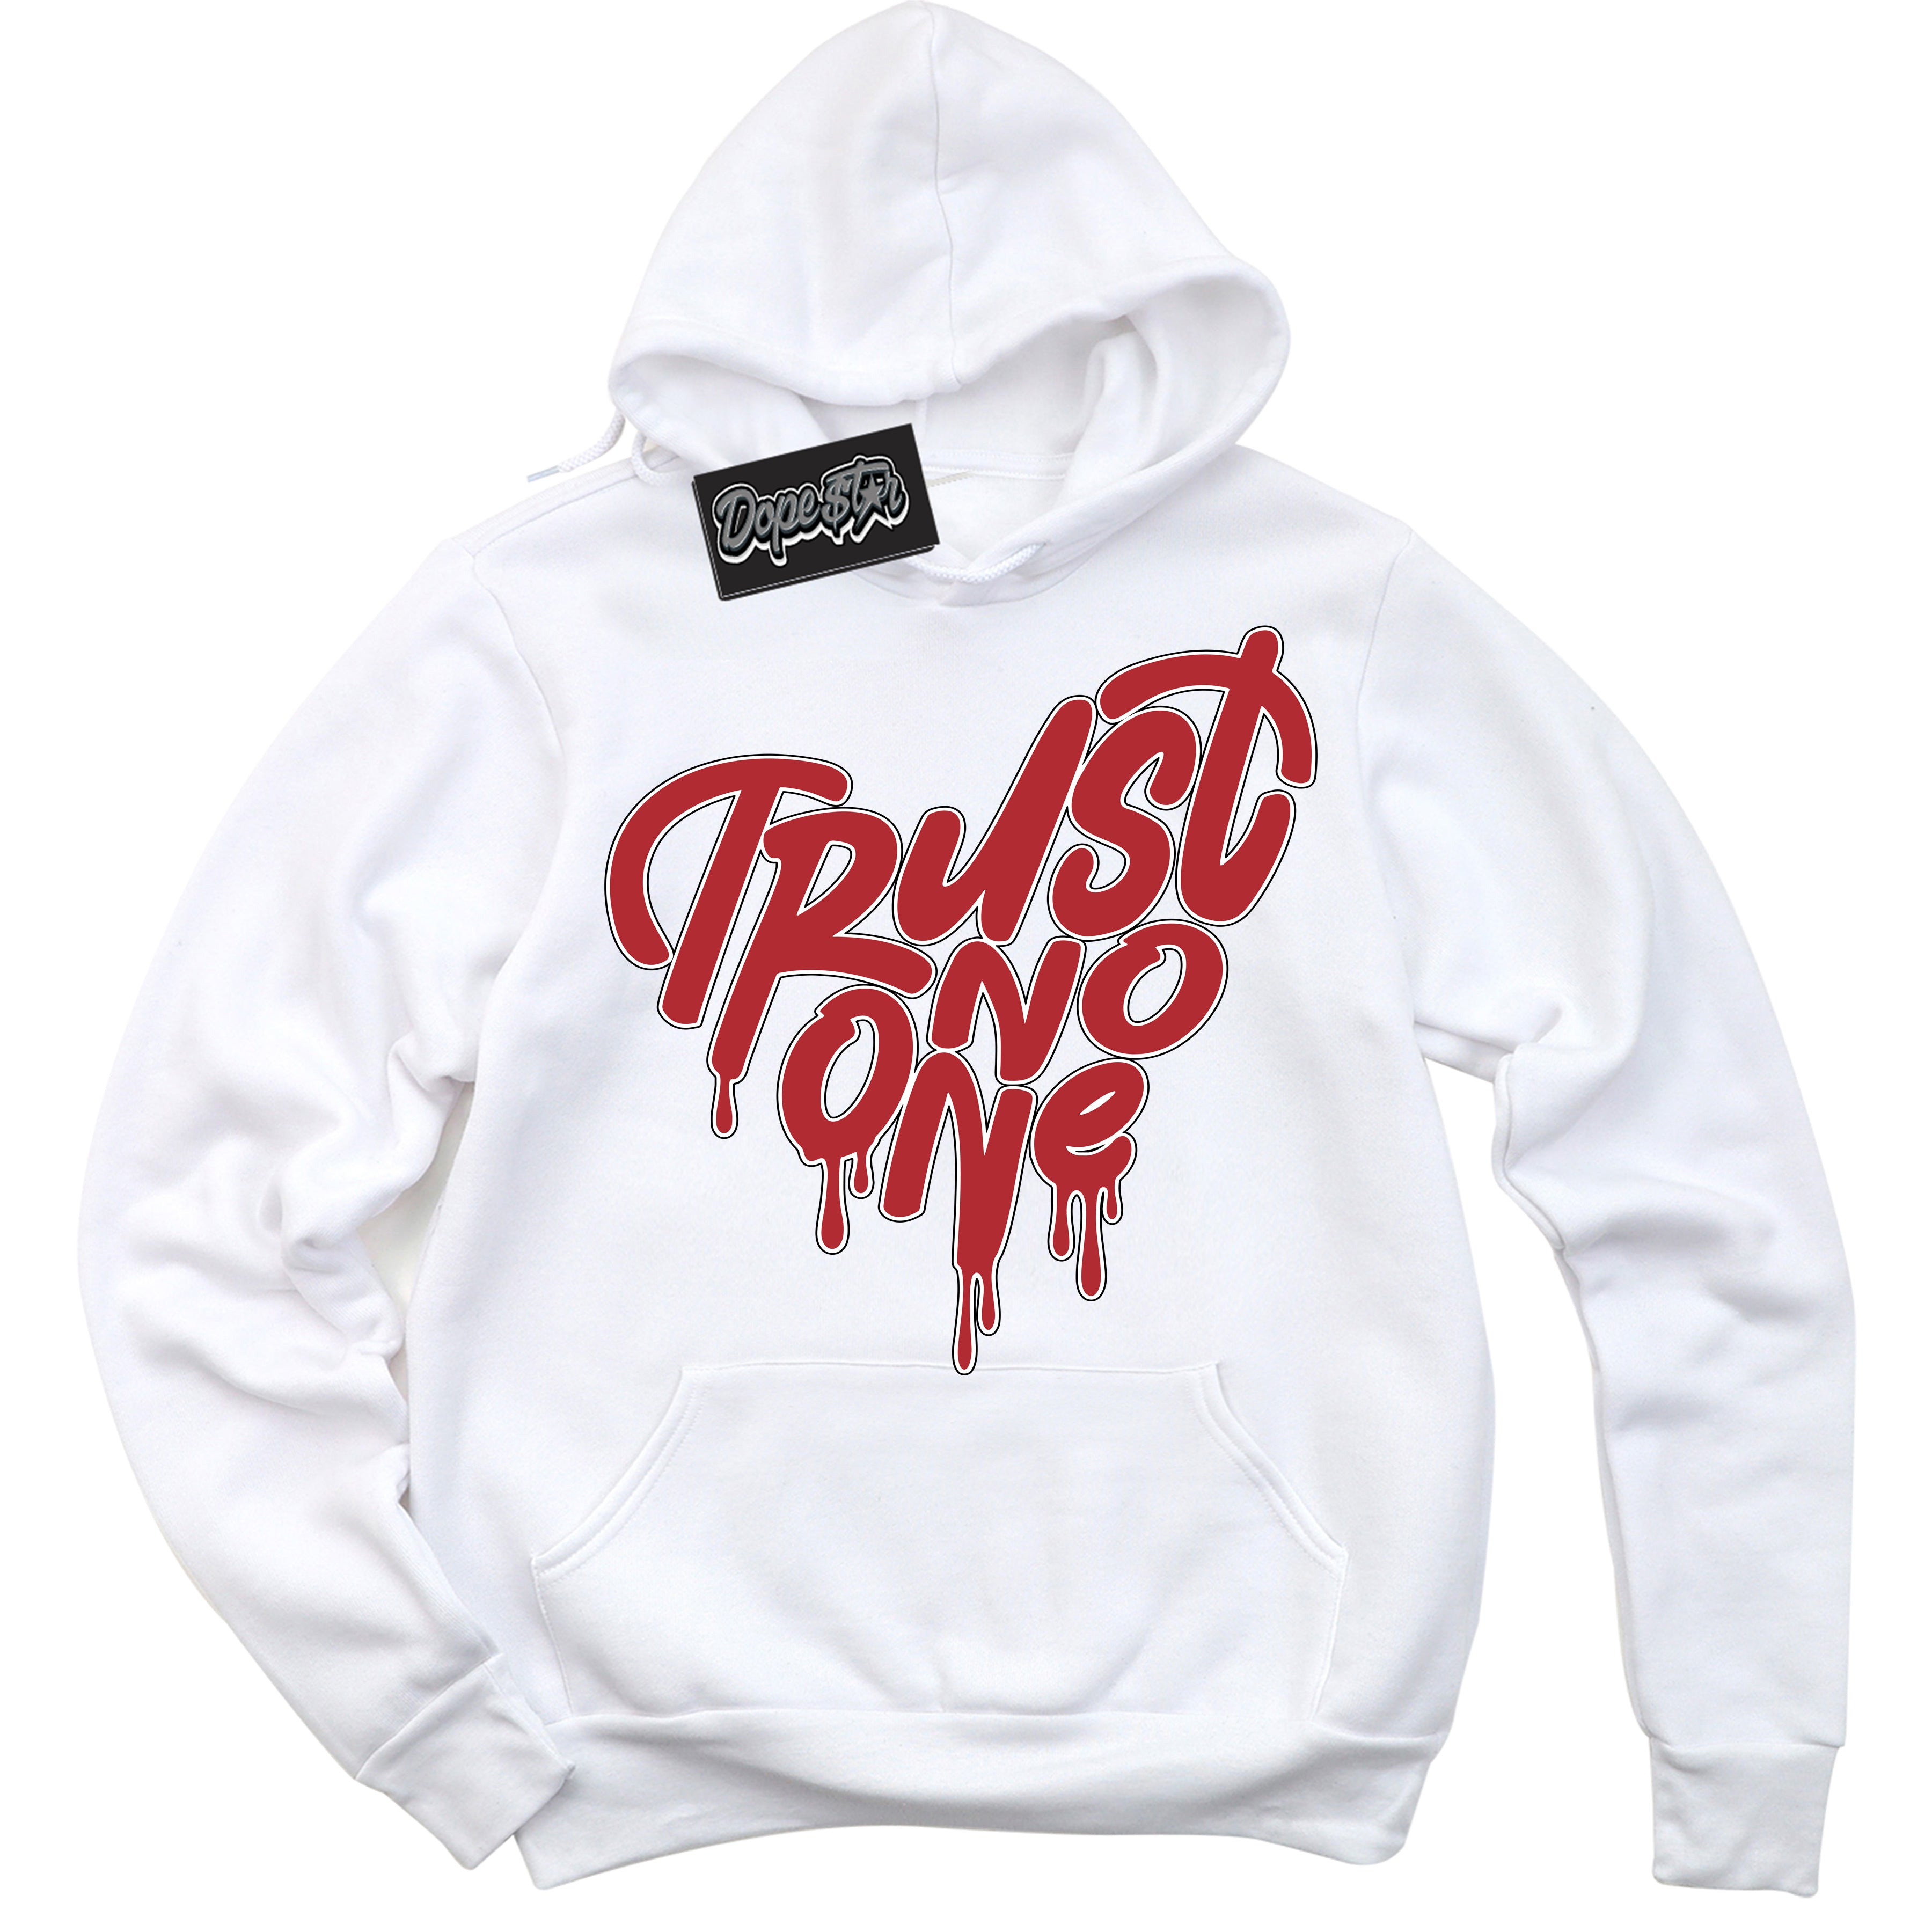 Cool White Hoodie With “ Trust No One Heart “  Design That Perfectly Matches Lost And Found 1s Sneakers.